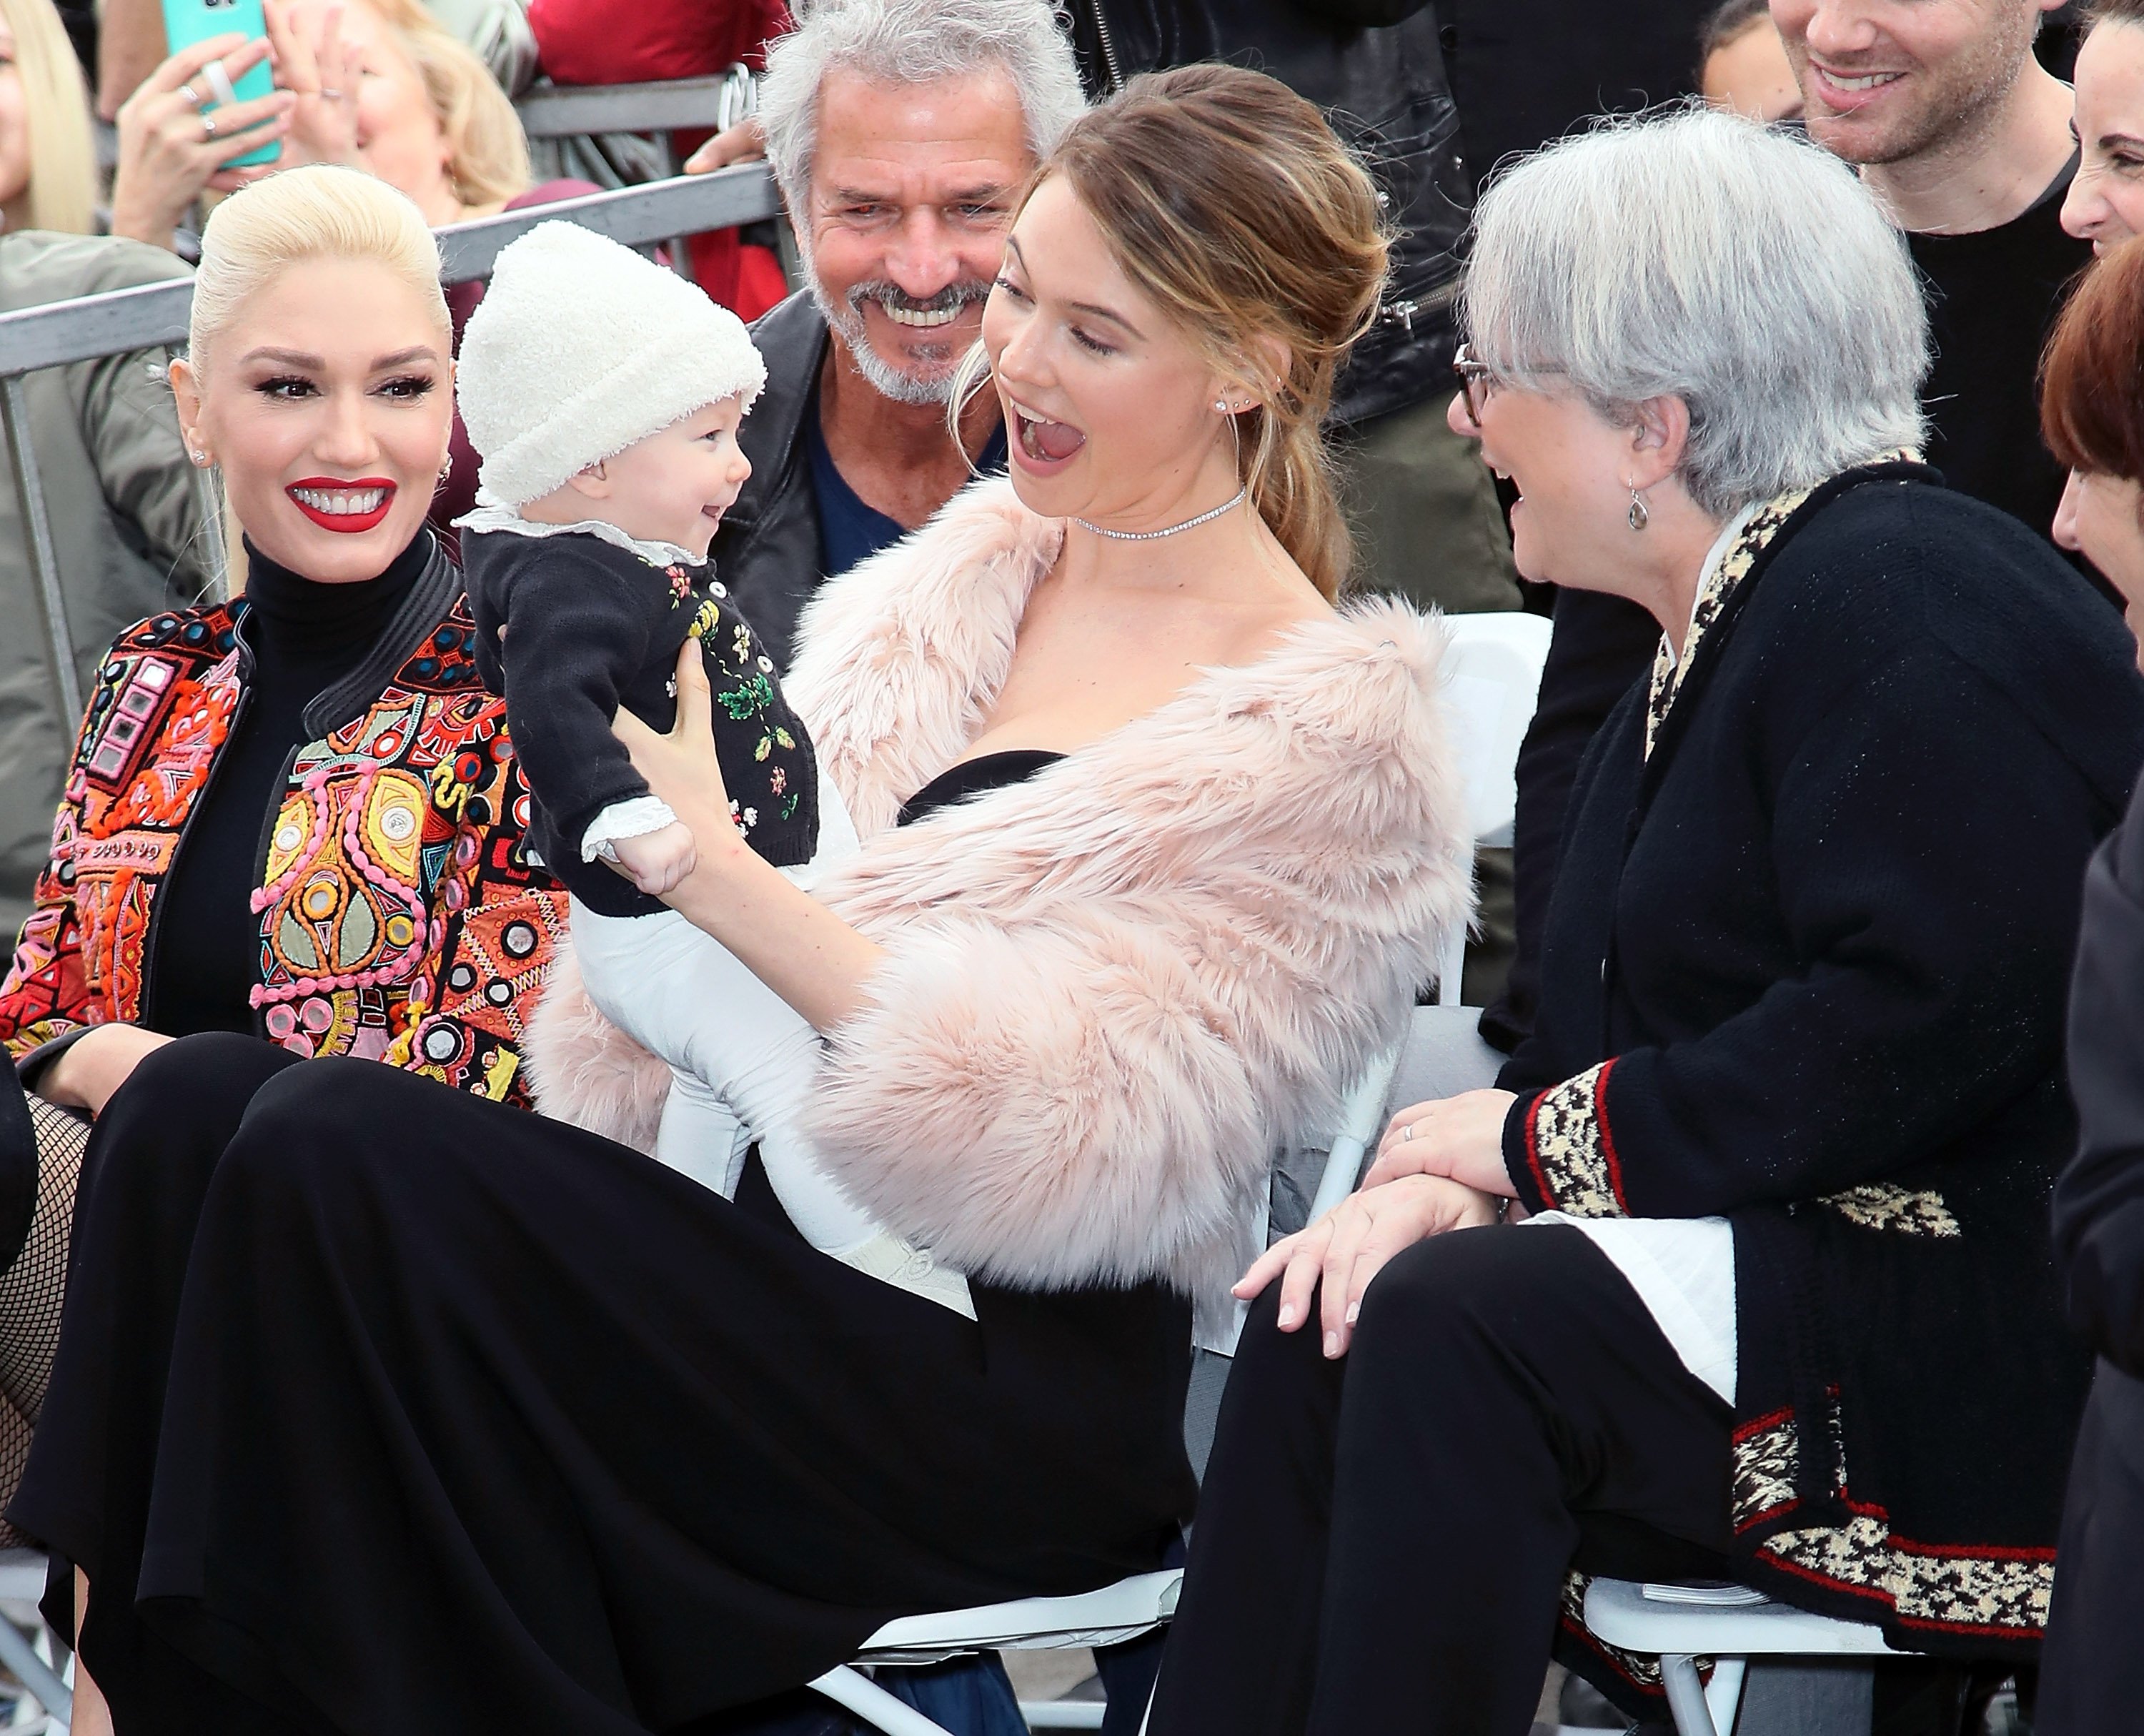 (From L-R) Singer Gwen Stefani, Behati Prinsloo with her daughter, and Patsy Noah are pictured in attendance of Adam Levine being honored with a Star on the Hollywood Walk of Fame on February 10, 2017 in Hollywood | Source: Getty Images